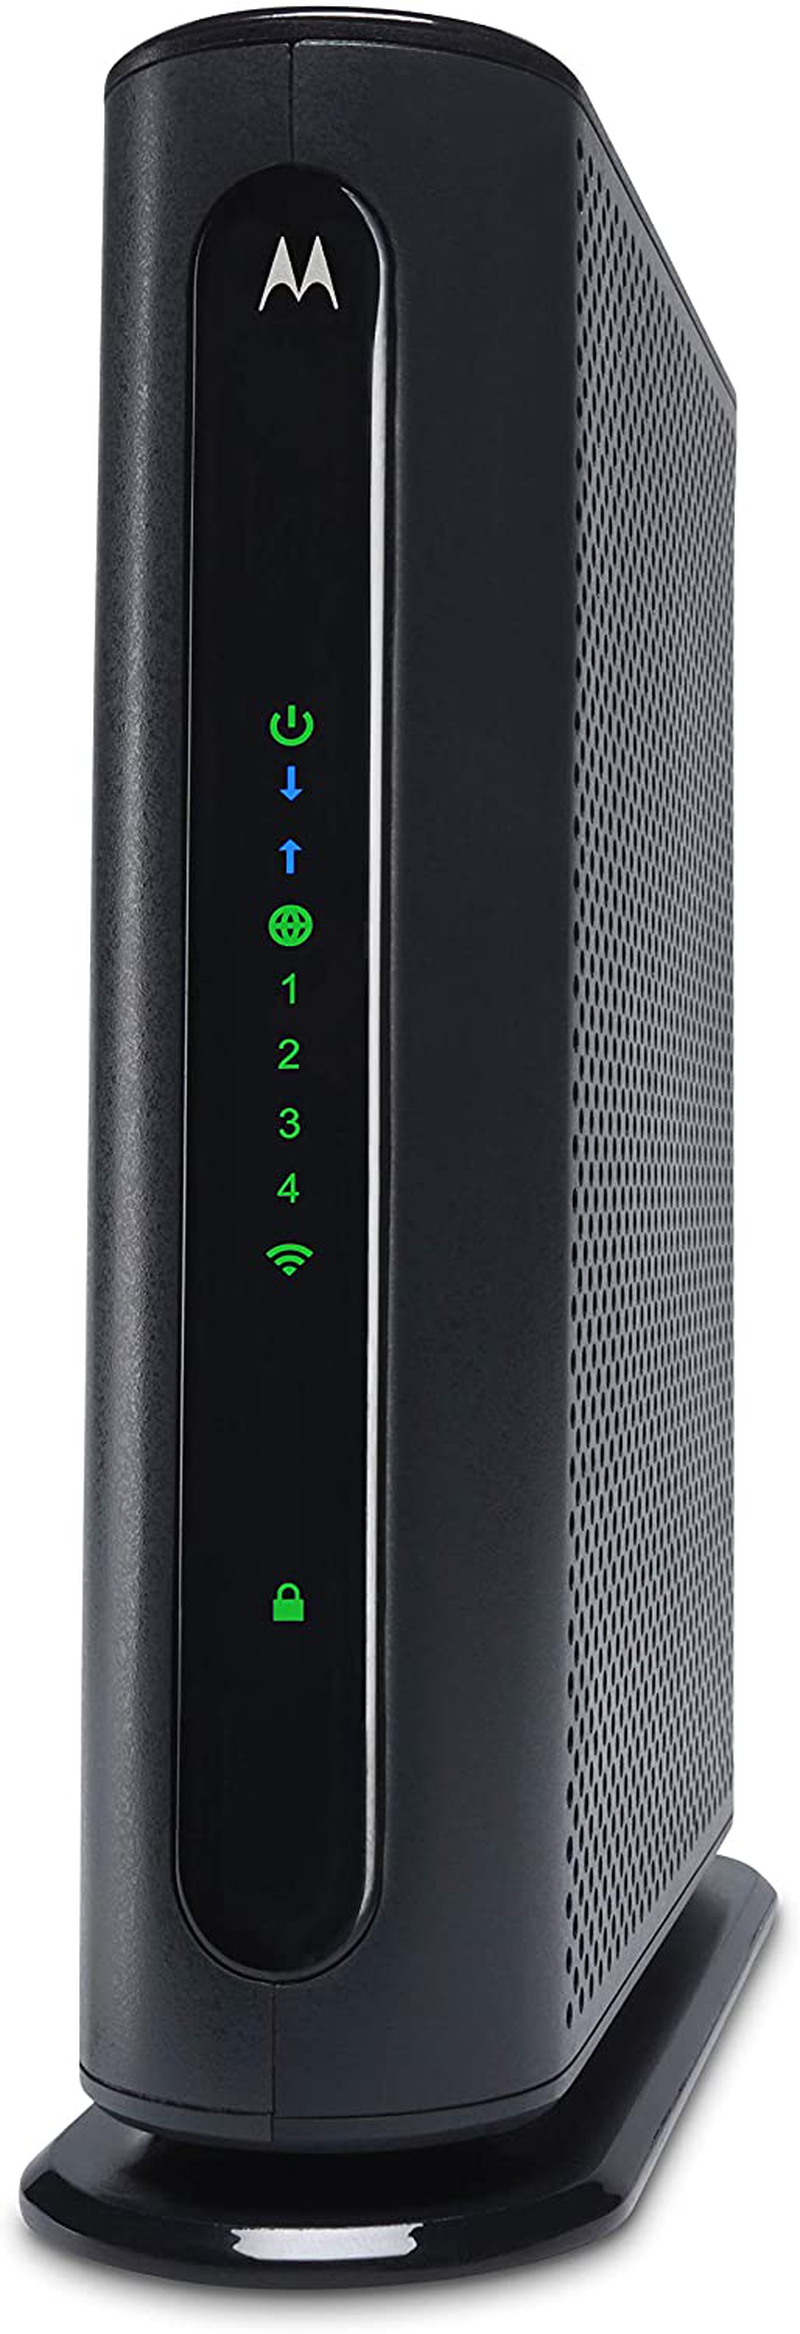 Motorola MG8702 | DOCSIS 3.1 Cable Modem + Wi-Fi Router (High Speed Combo) with Intelligent Power Boost | AC3200 Wi-Fi Speed | Approved for Comcast Xfinity, Cox, and Charter Spectrum Electronics > Networking > Modems Motorola N-450 Speed (Wi-Fi 4) DOCSIS 3.0  